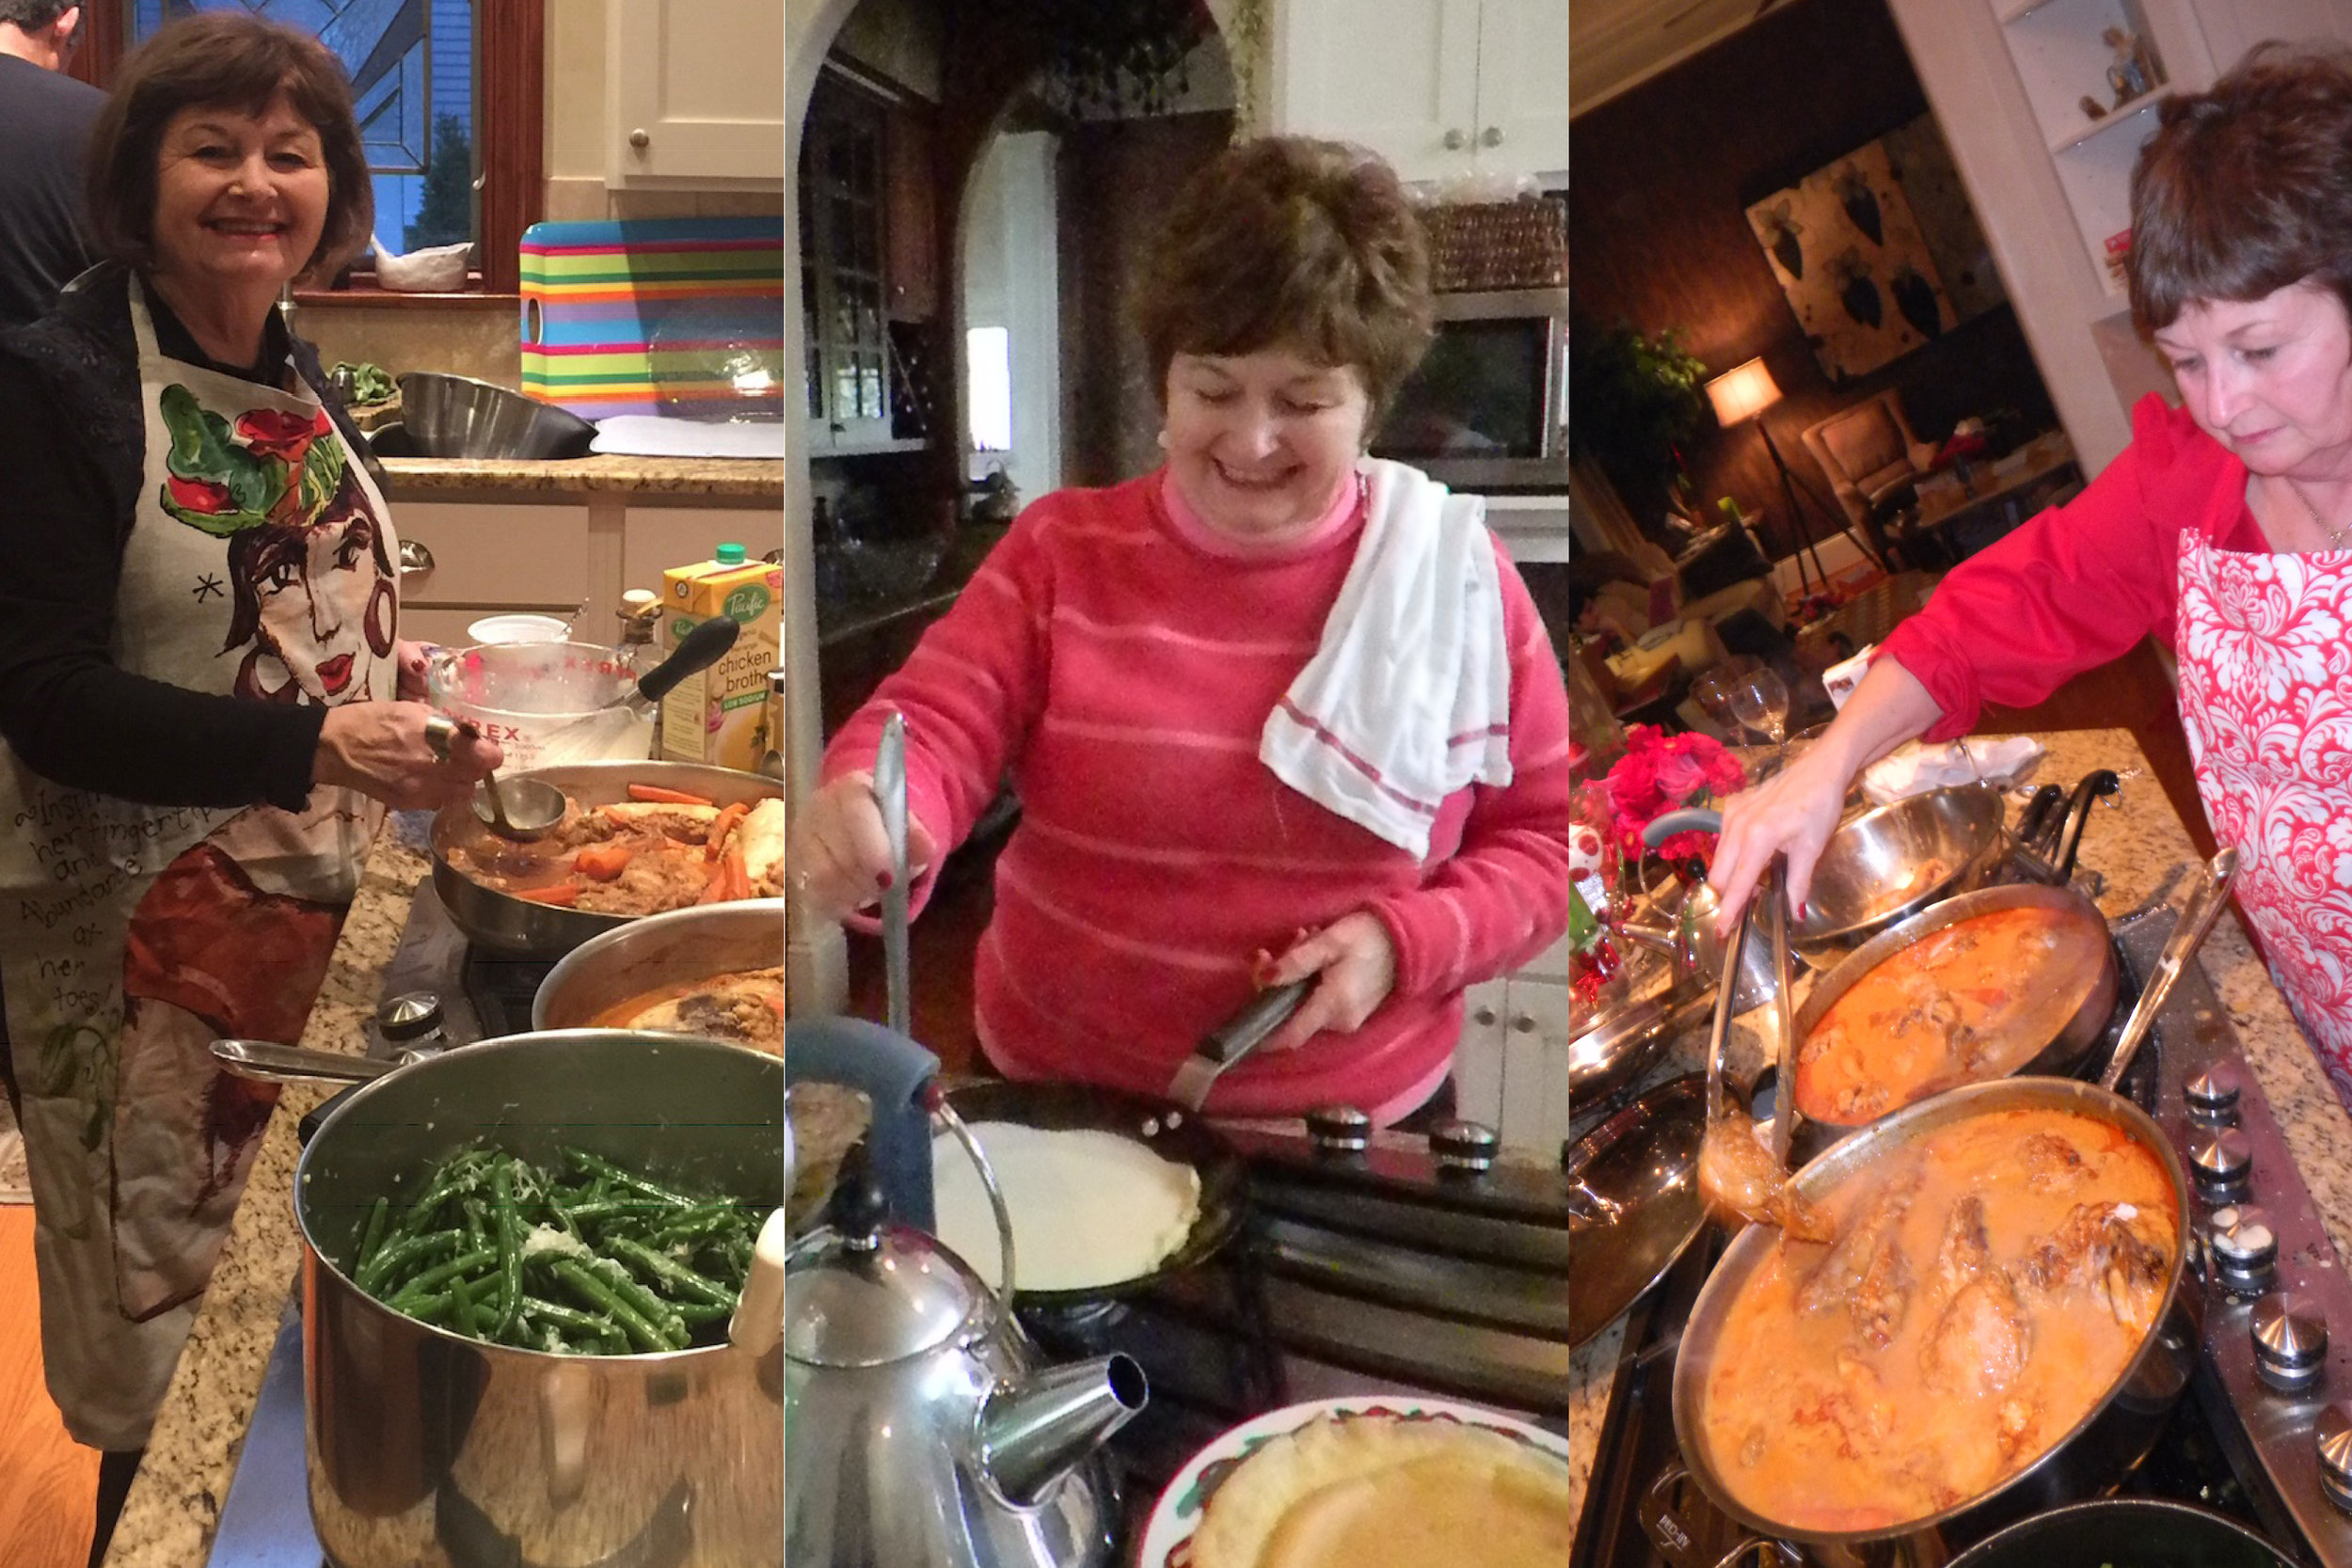 Mom cooking up Christmas feasts for our big family over the years. Our tradition is a family recipe for chicken paprikash and spaetzle for dinner and my mom’s famous (to me!) palacsinta for breakfast.